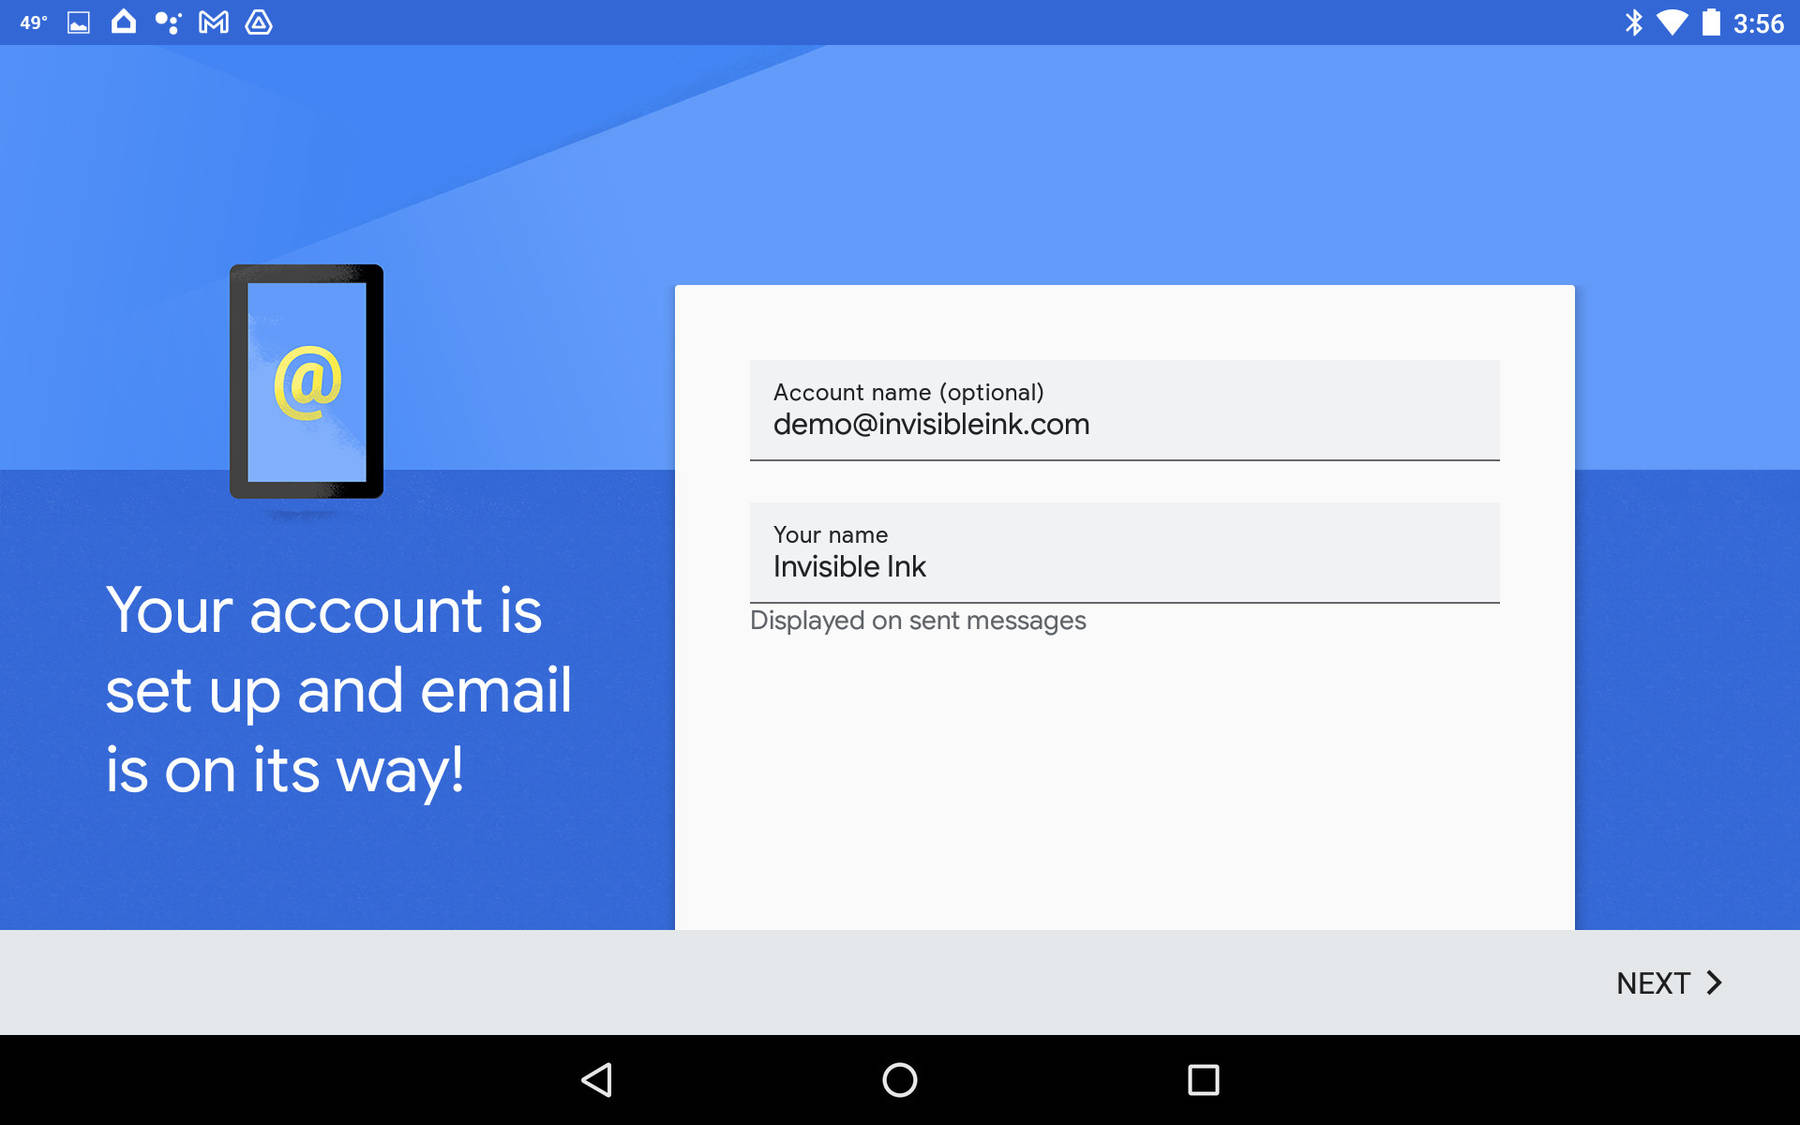 Your account has been successfully added. Tap next to begin using Gmail.